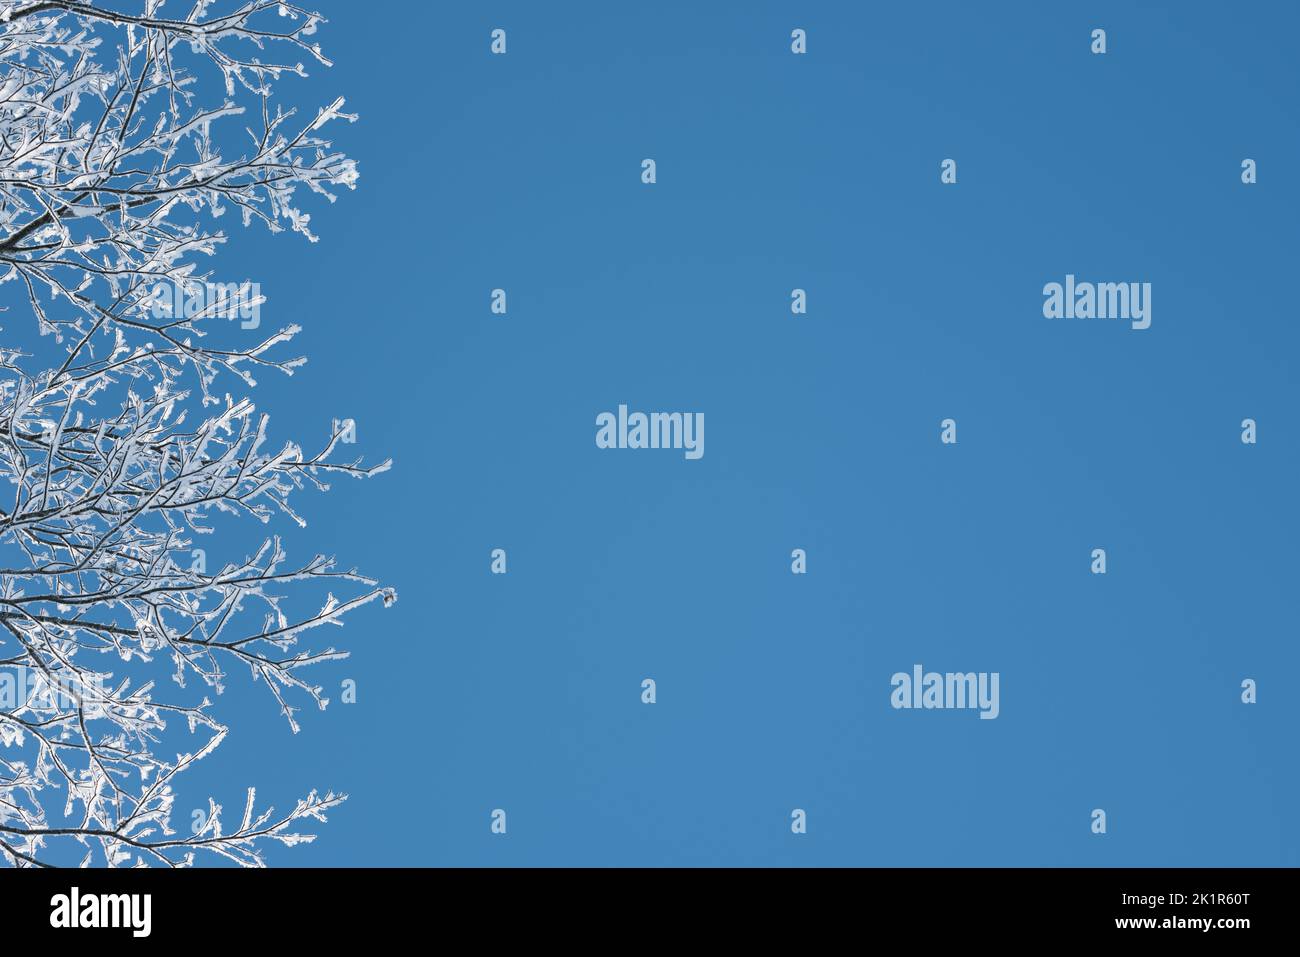 Winter background with branches in hoarfrost against the blue sky Stock Photo